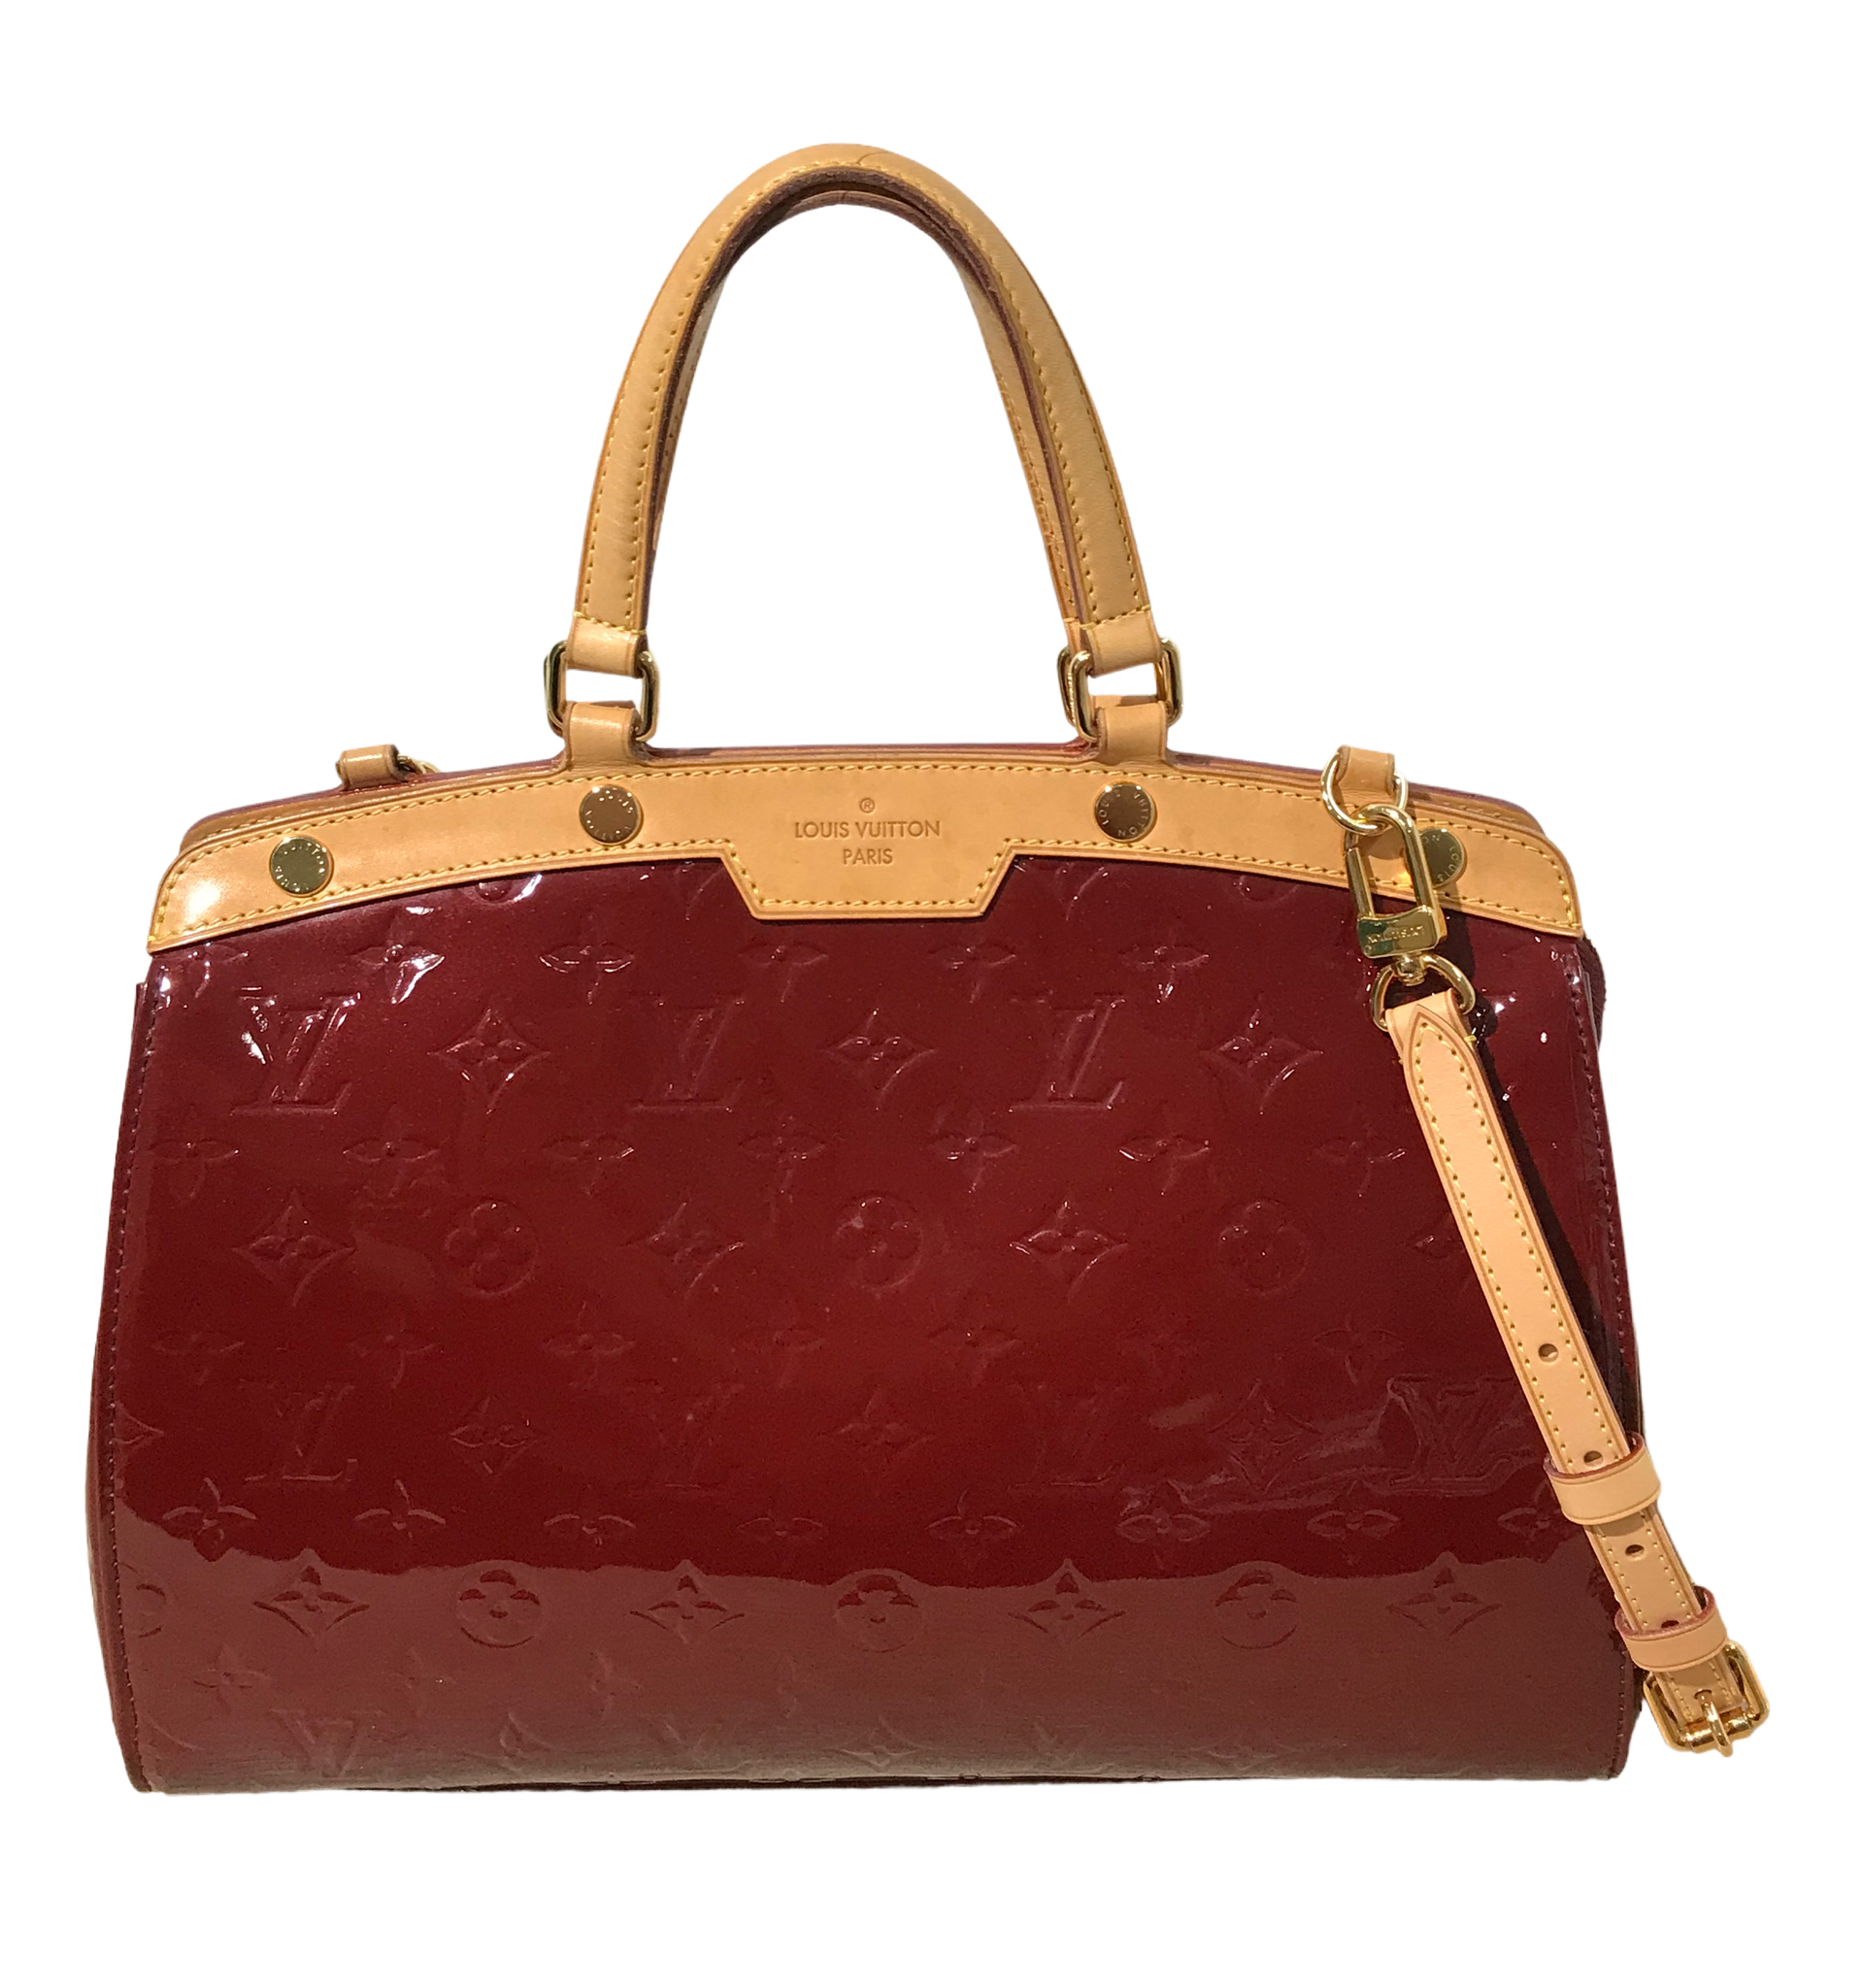 Louis Vuitton - Authenticated Melrose Handbag - Leather Burgundy for Women, Very Good Condition